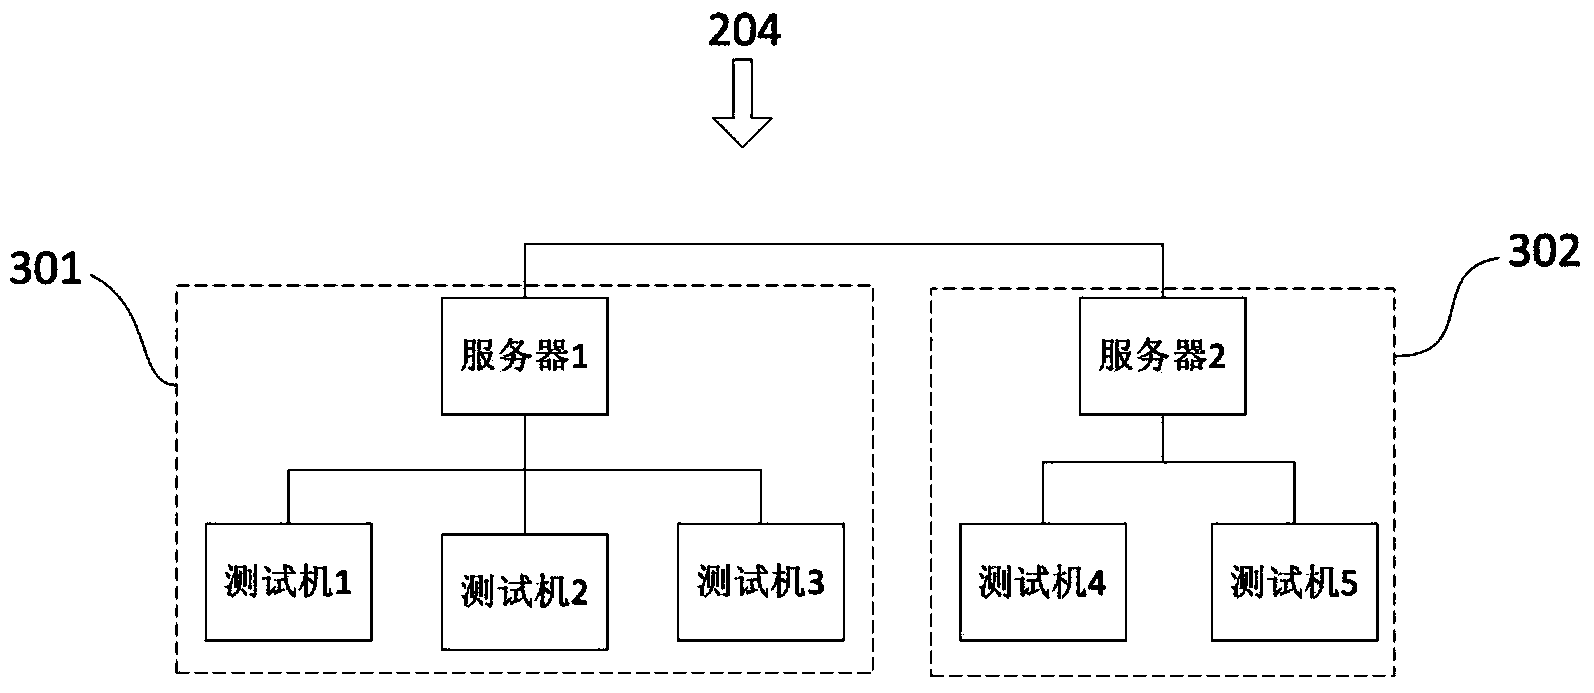 Application program testing method and system based on service process control